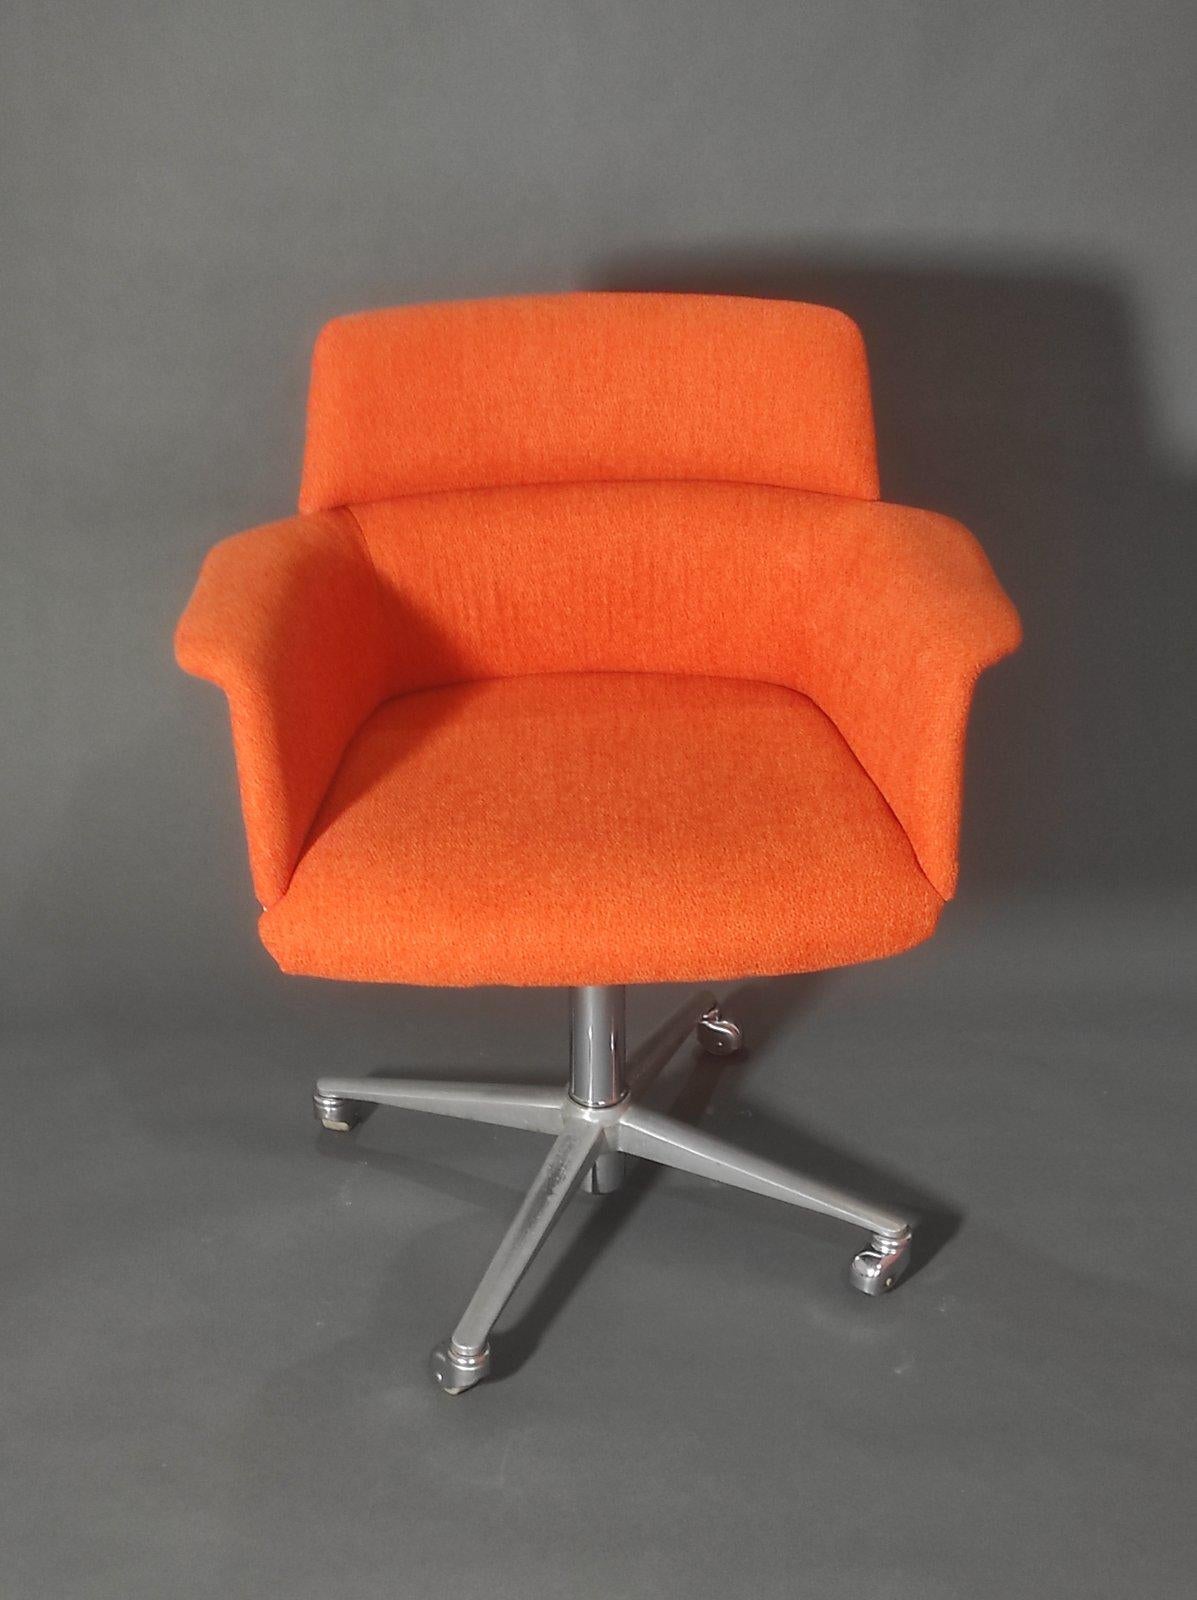 Model 250 Space Age Ofice Chair By Georg Leowald for Vilkhahn 1960s For Sale 5